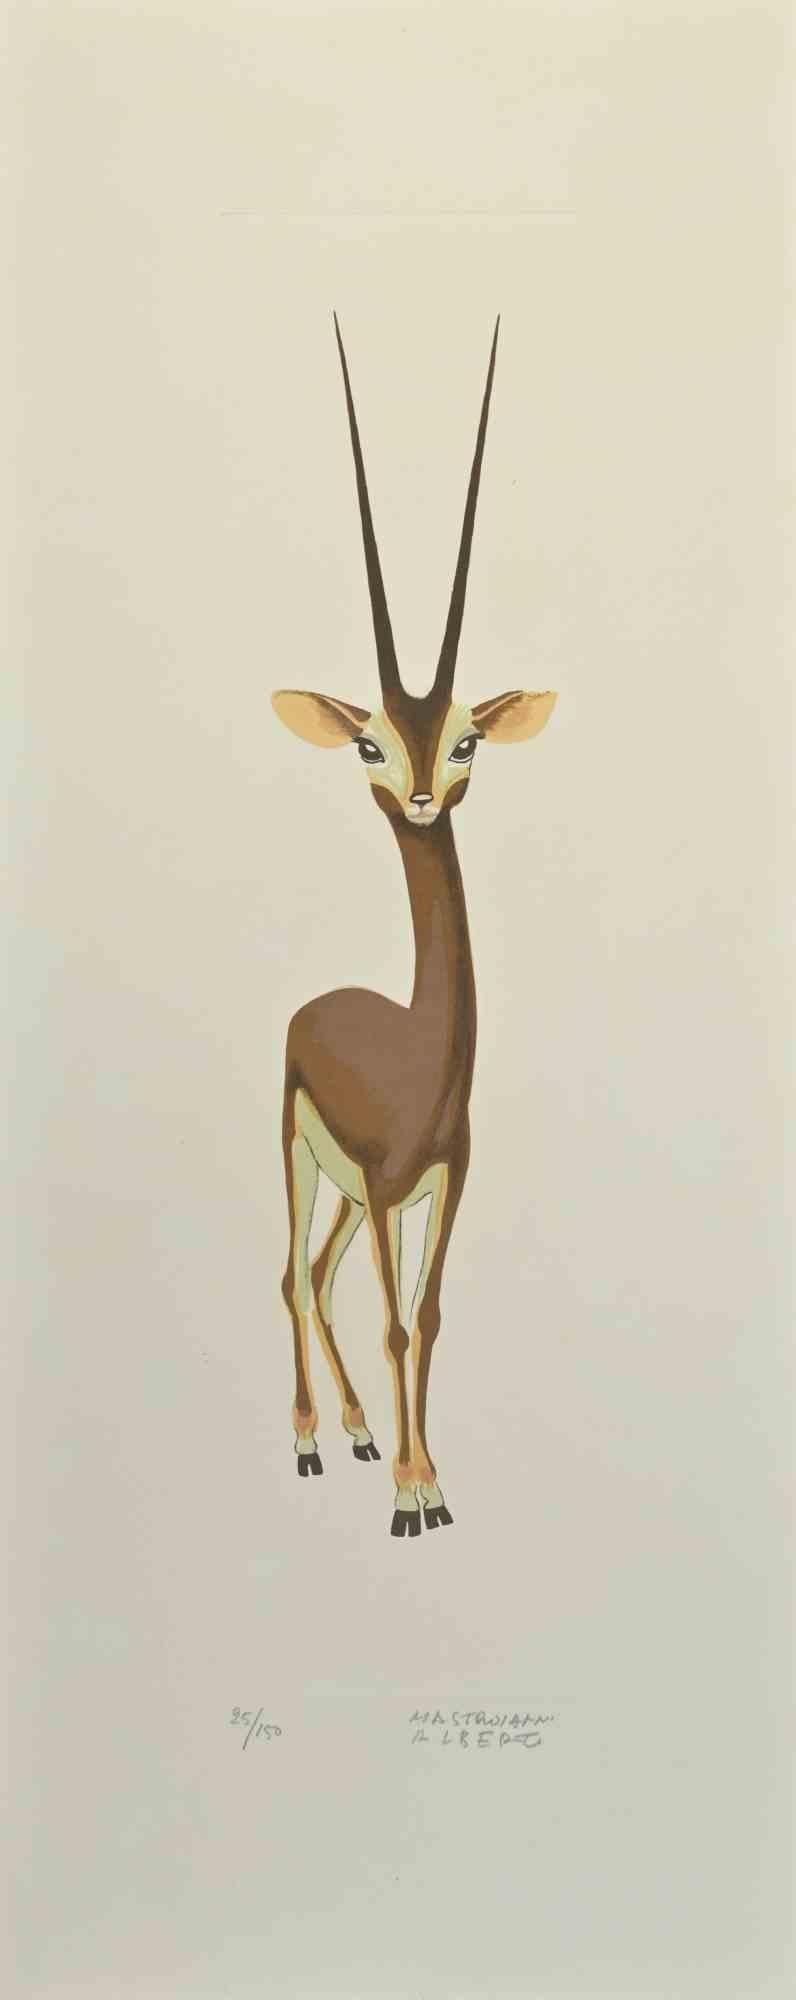 Gazelle is a lithograph realized by Alberto Mastroianni in the 1970s.

Hand Signed on the lower right margin. Numbered on the lower margin in pencil. from the edition of 150 prints.

The artist's efforts indicate the perfect application of aesthetic